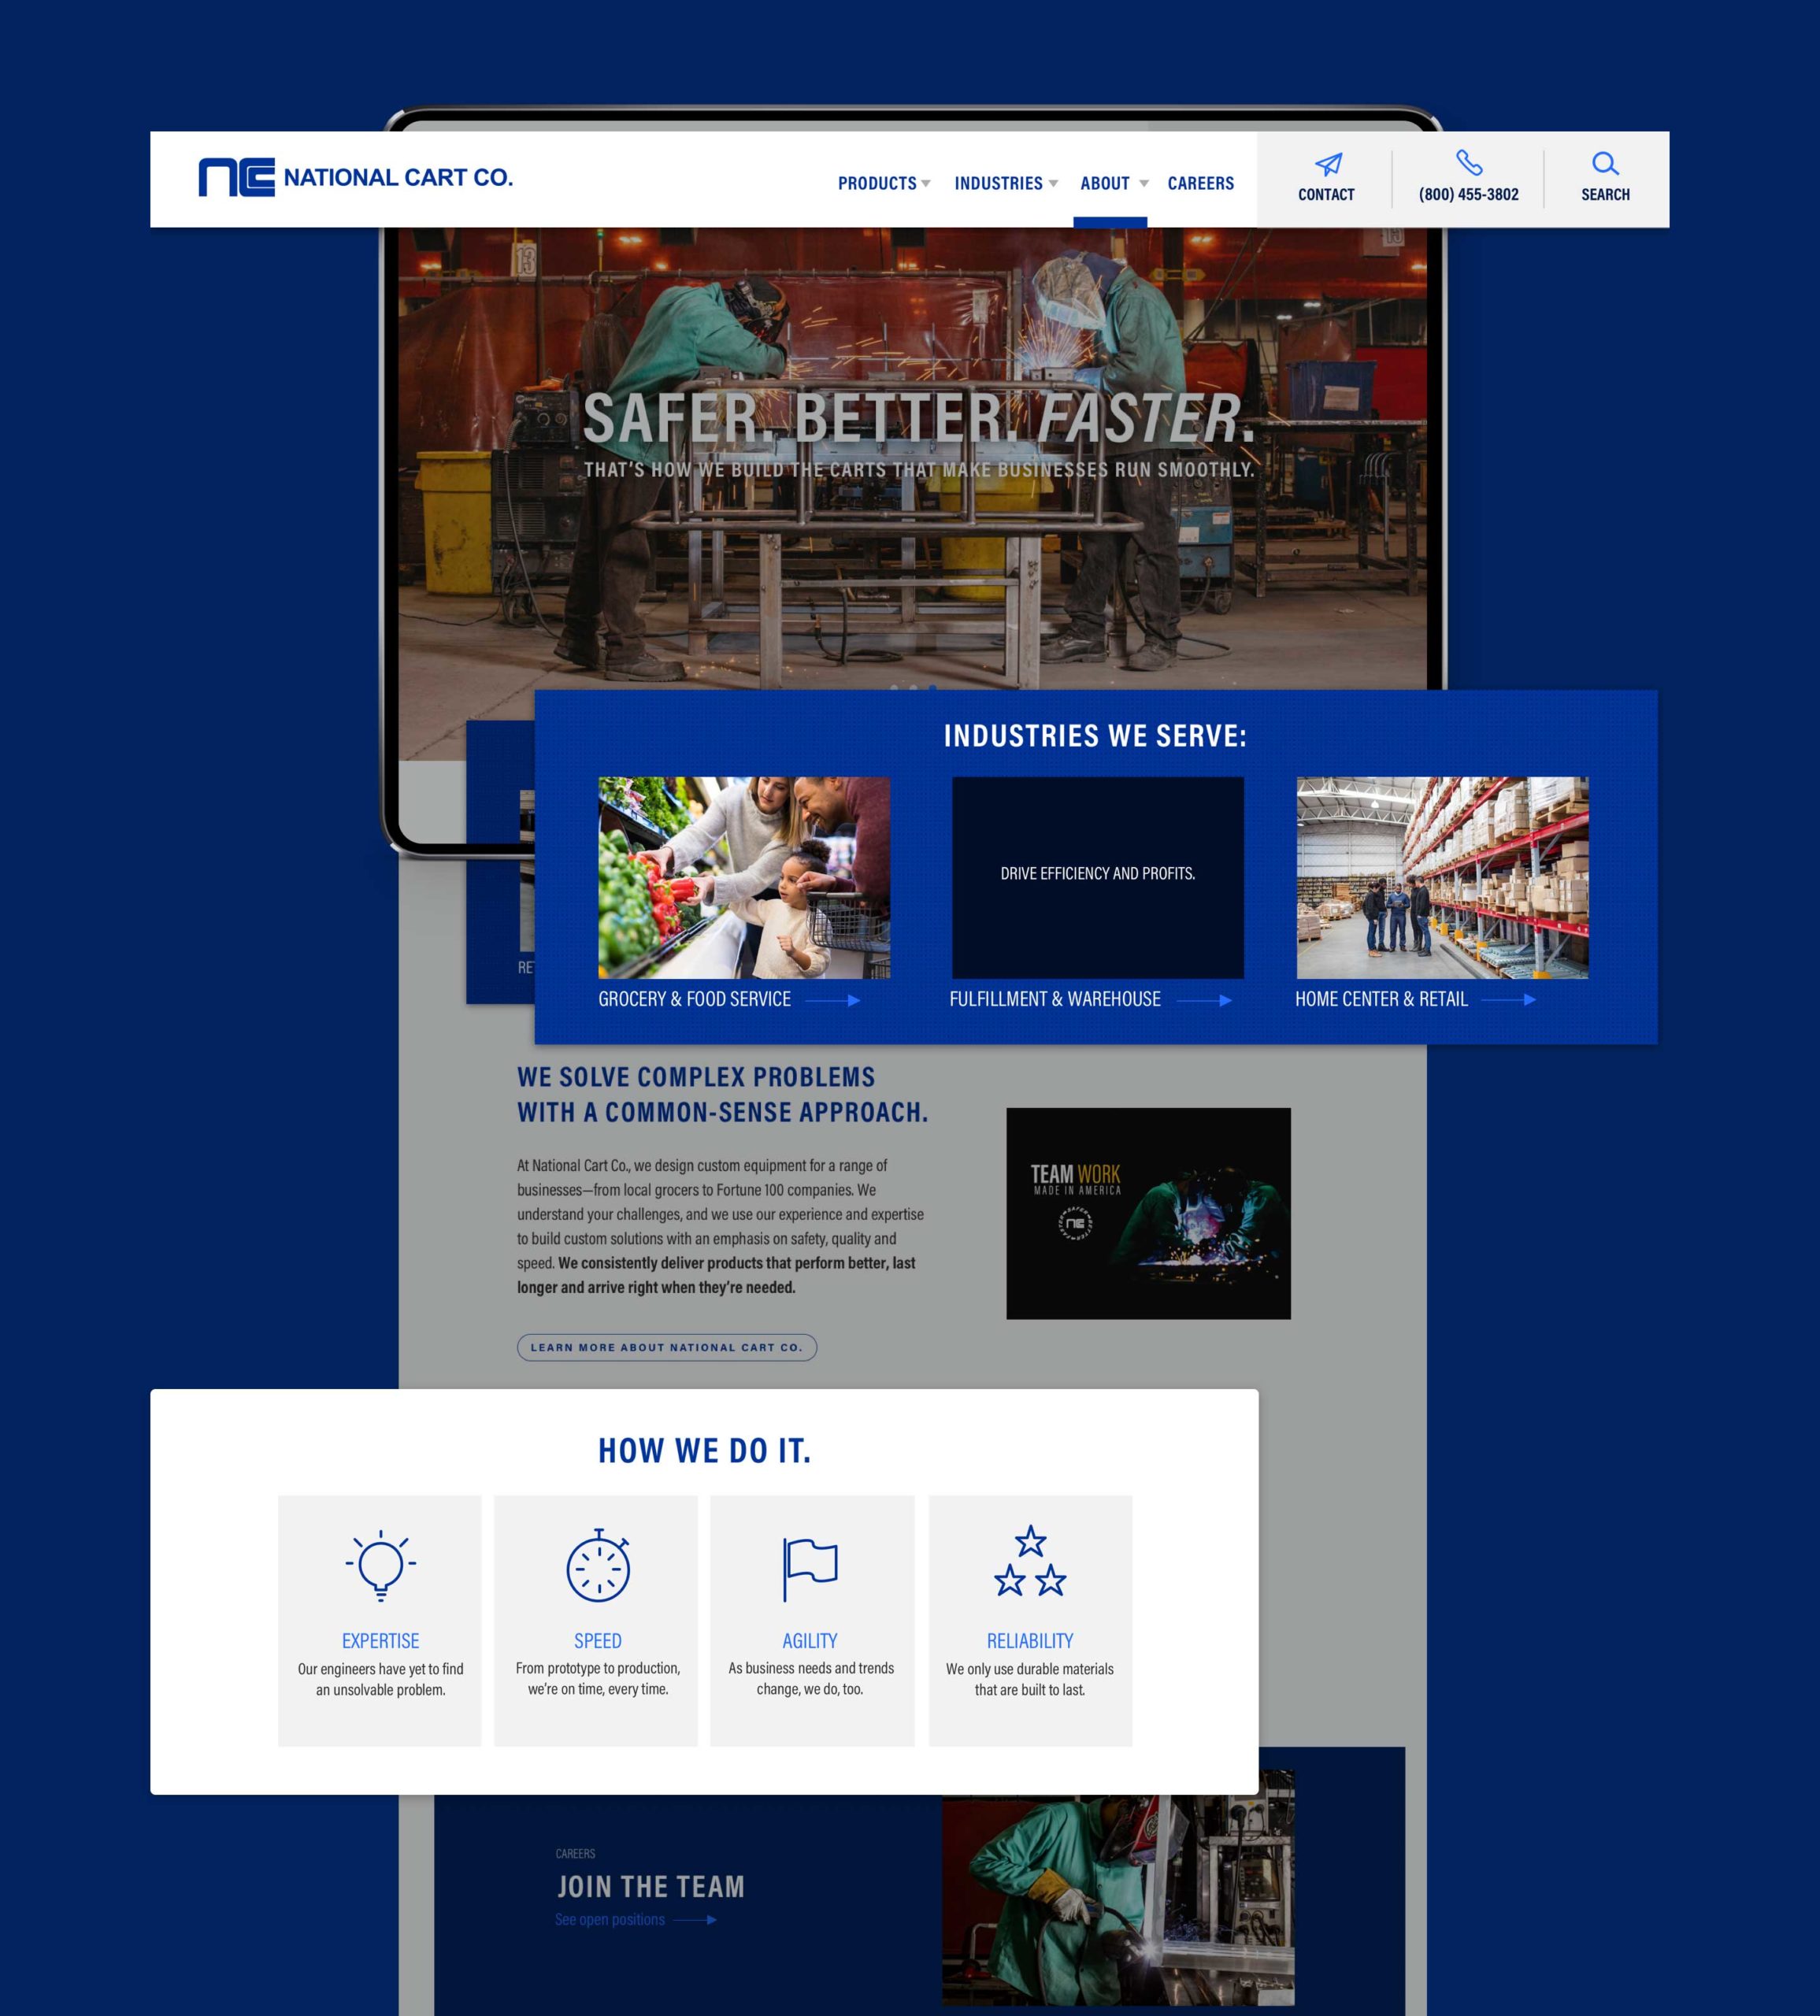 Elements of the National Cart Co. web design's homepage